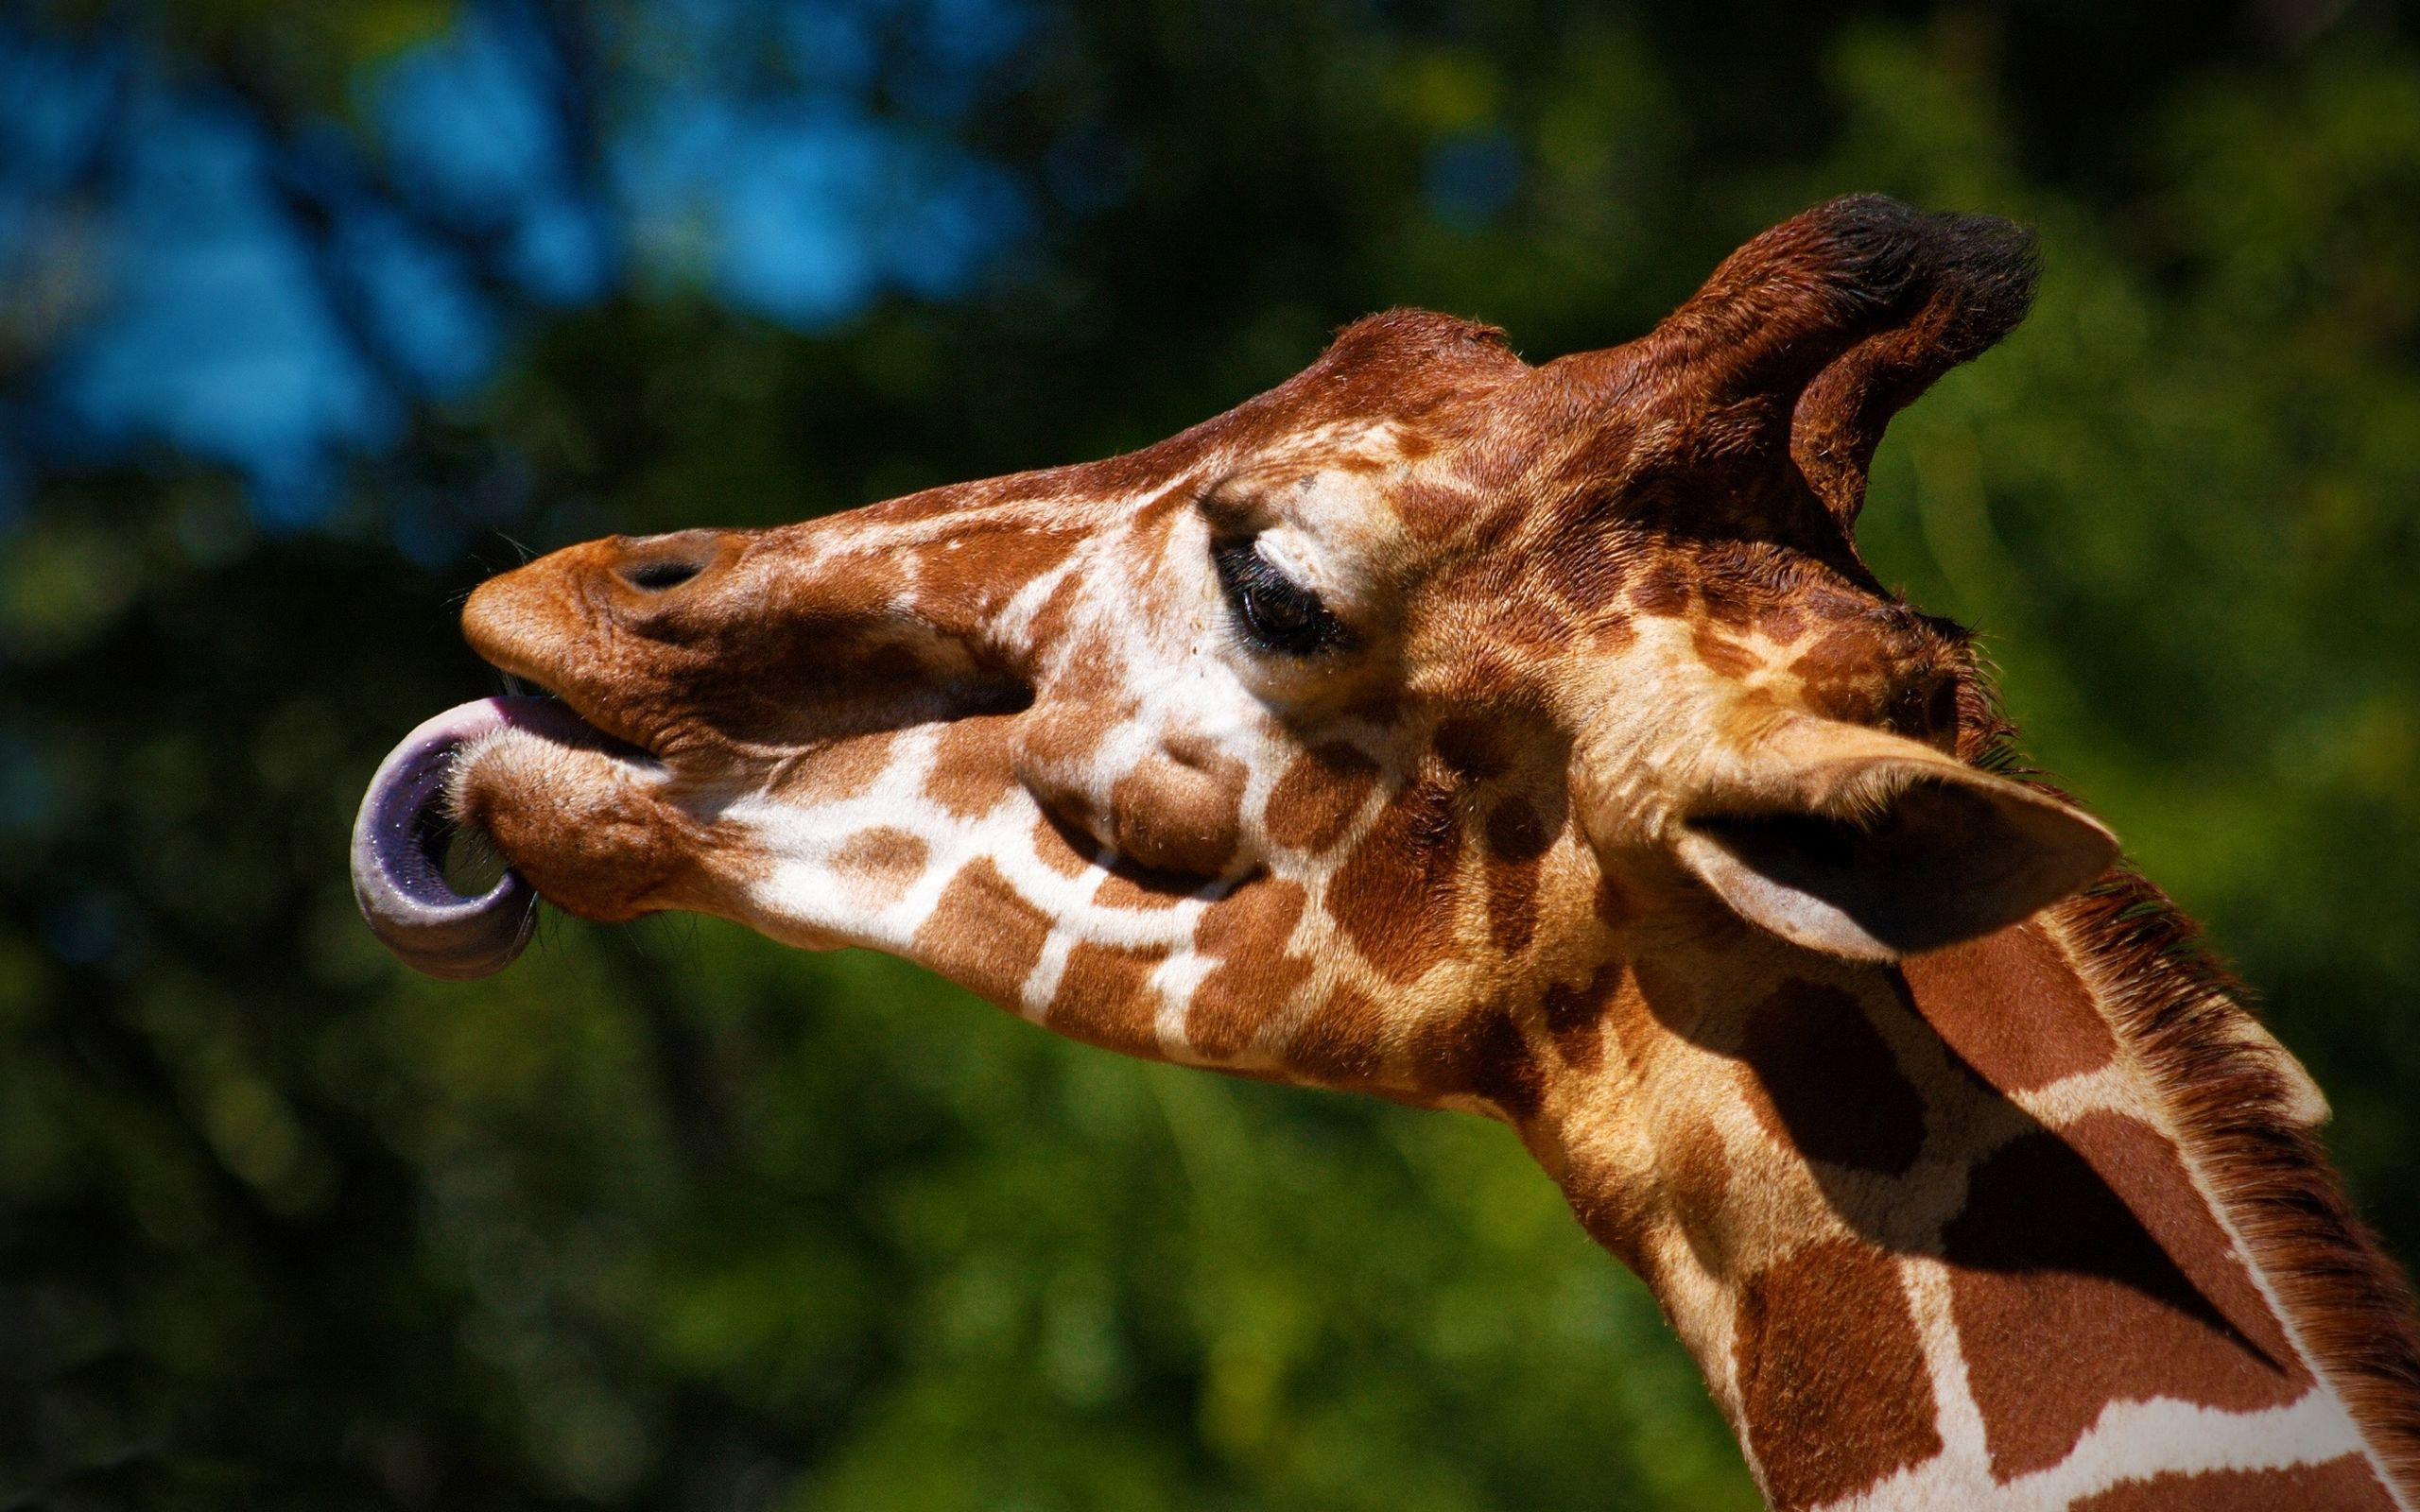 Giraffe: Well known for its long neck, Terrestrial animal. 2560x1600 HD Wallpaper.